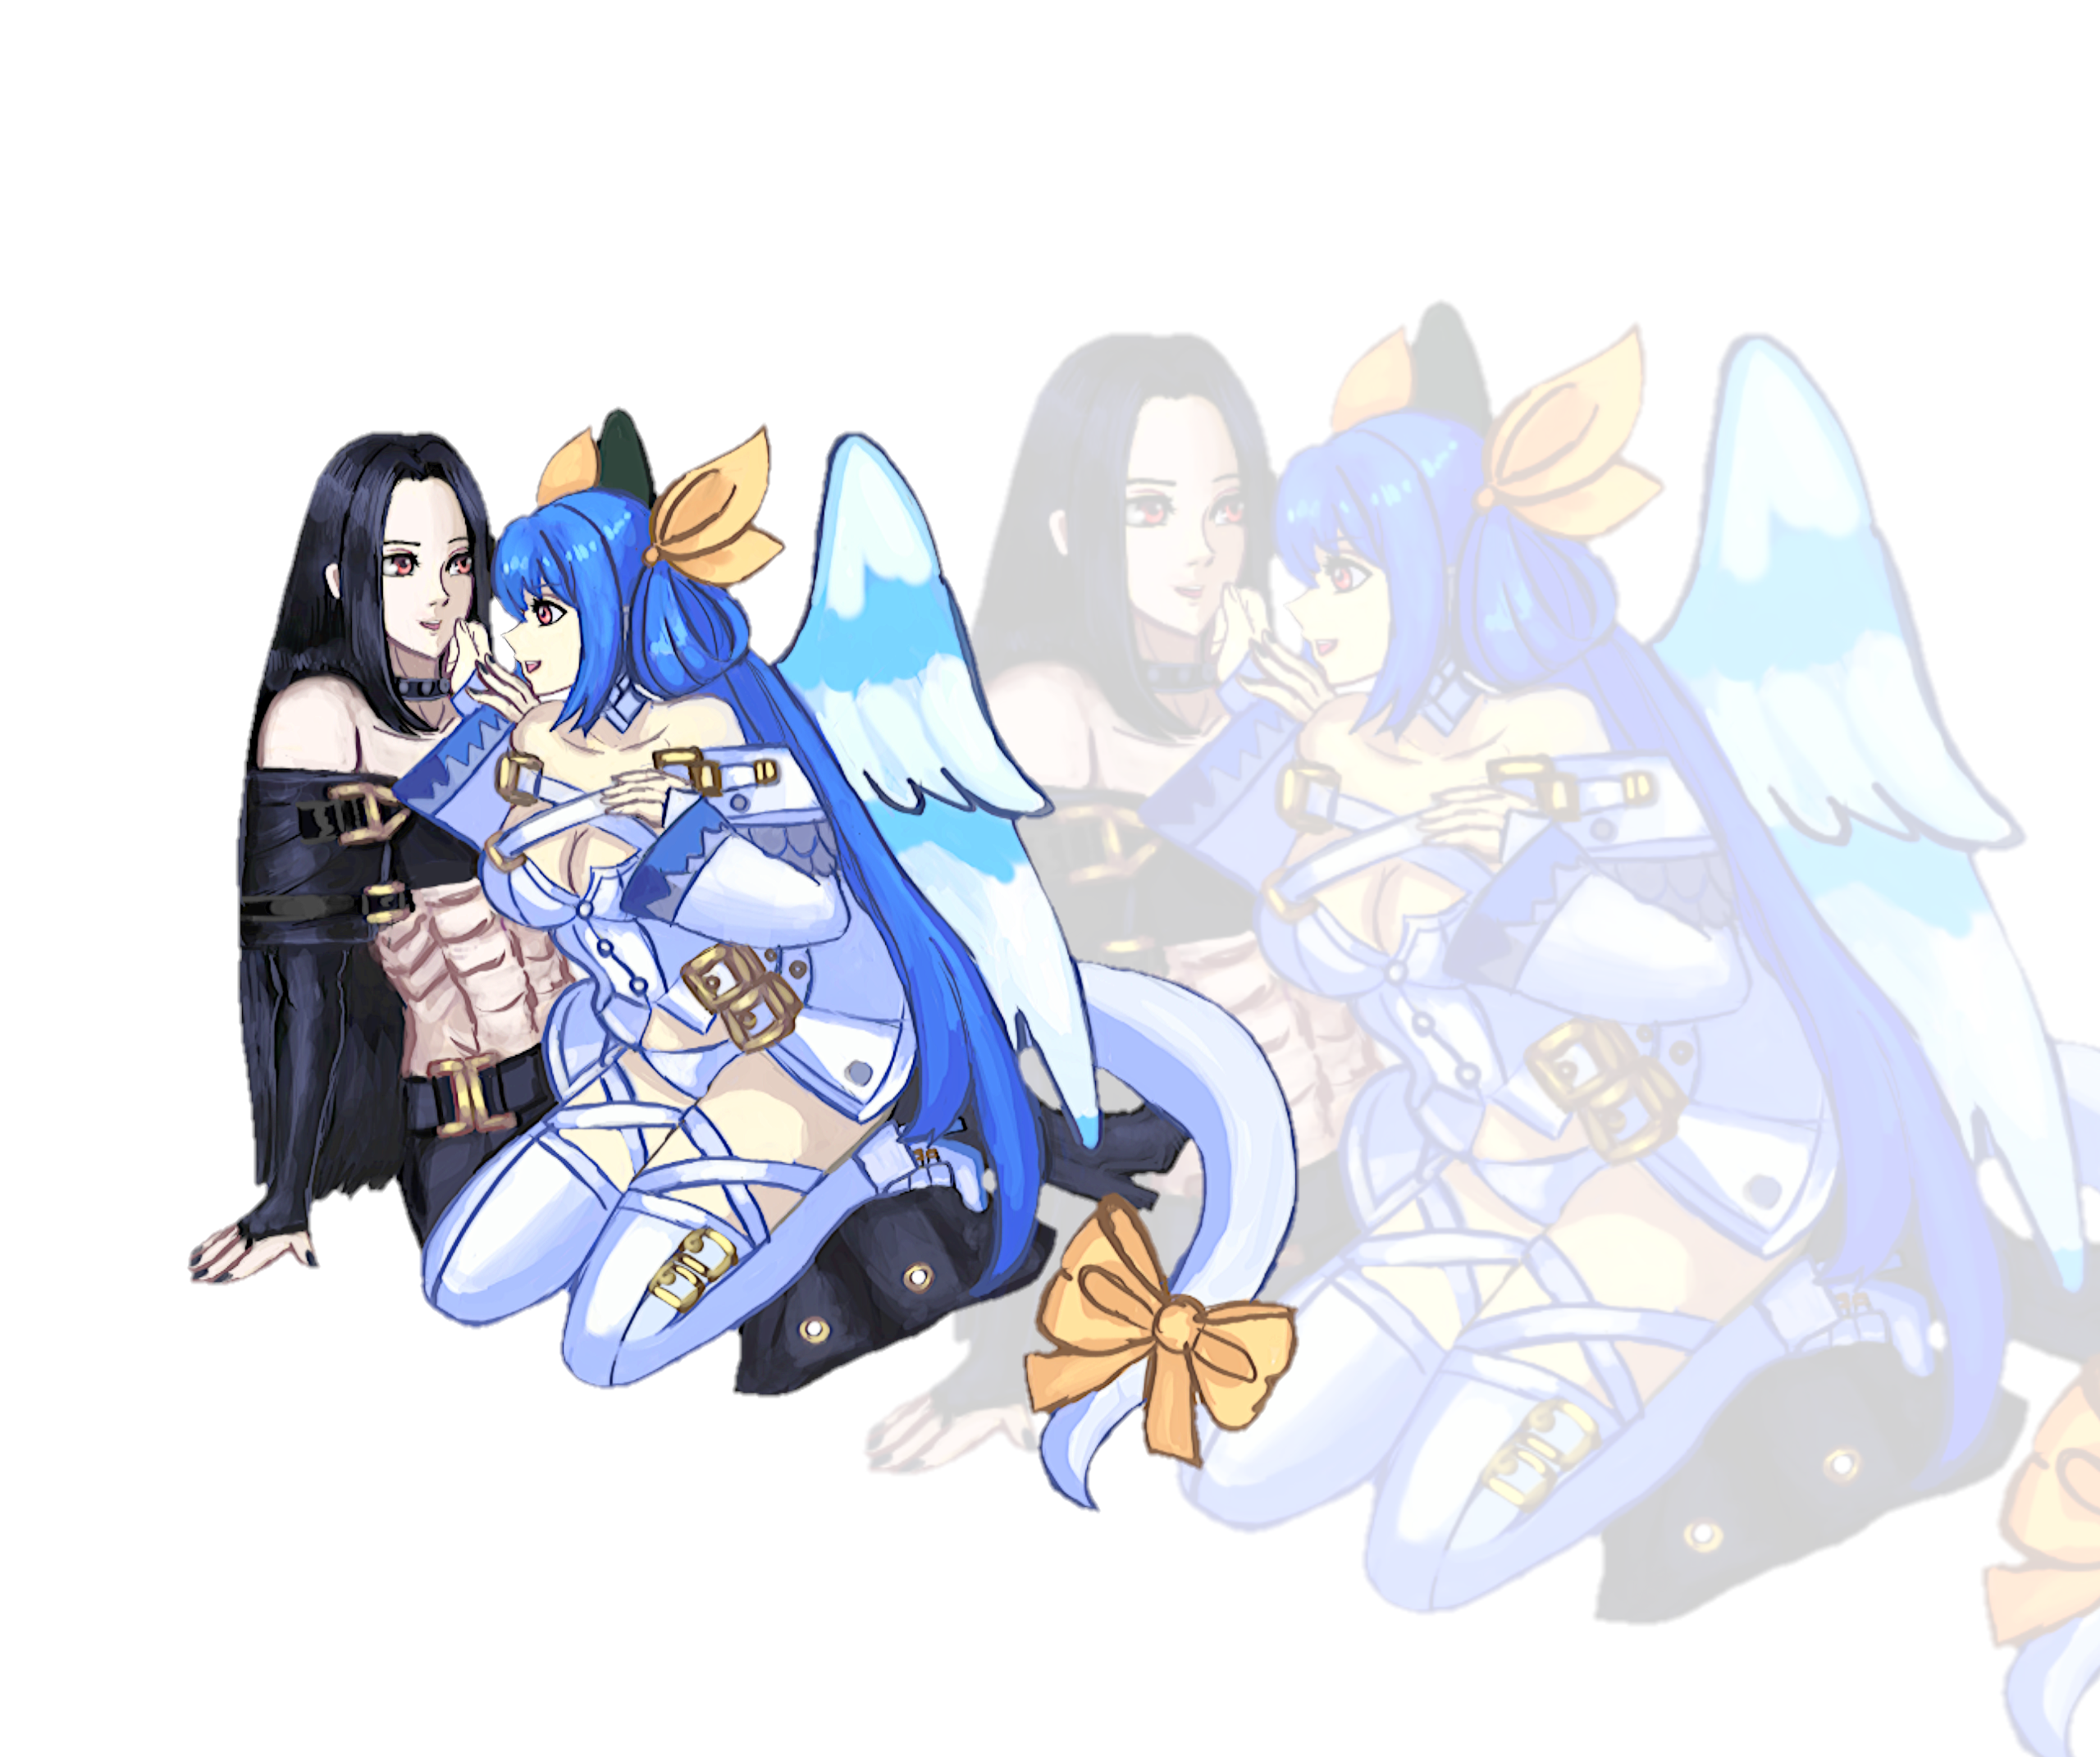 Anime 2560x2142 Guilty Gear video game art Dizzy (Guilty Gear) anime girl with wings anime girls Testament (guilty gear) fighting games couple blue hair Testament x Dizzy Tesdizzy (guilty_gear)